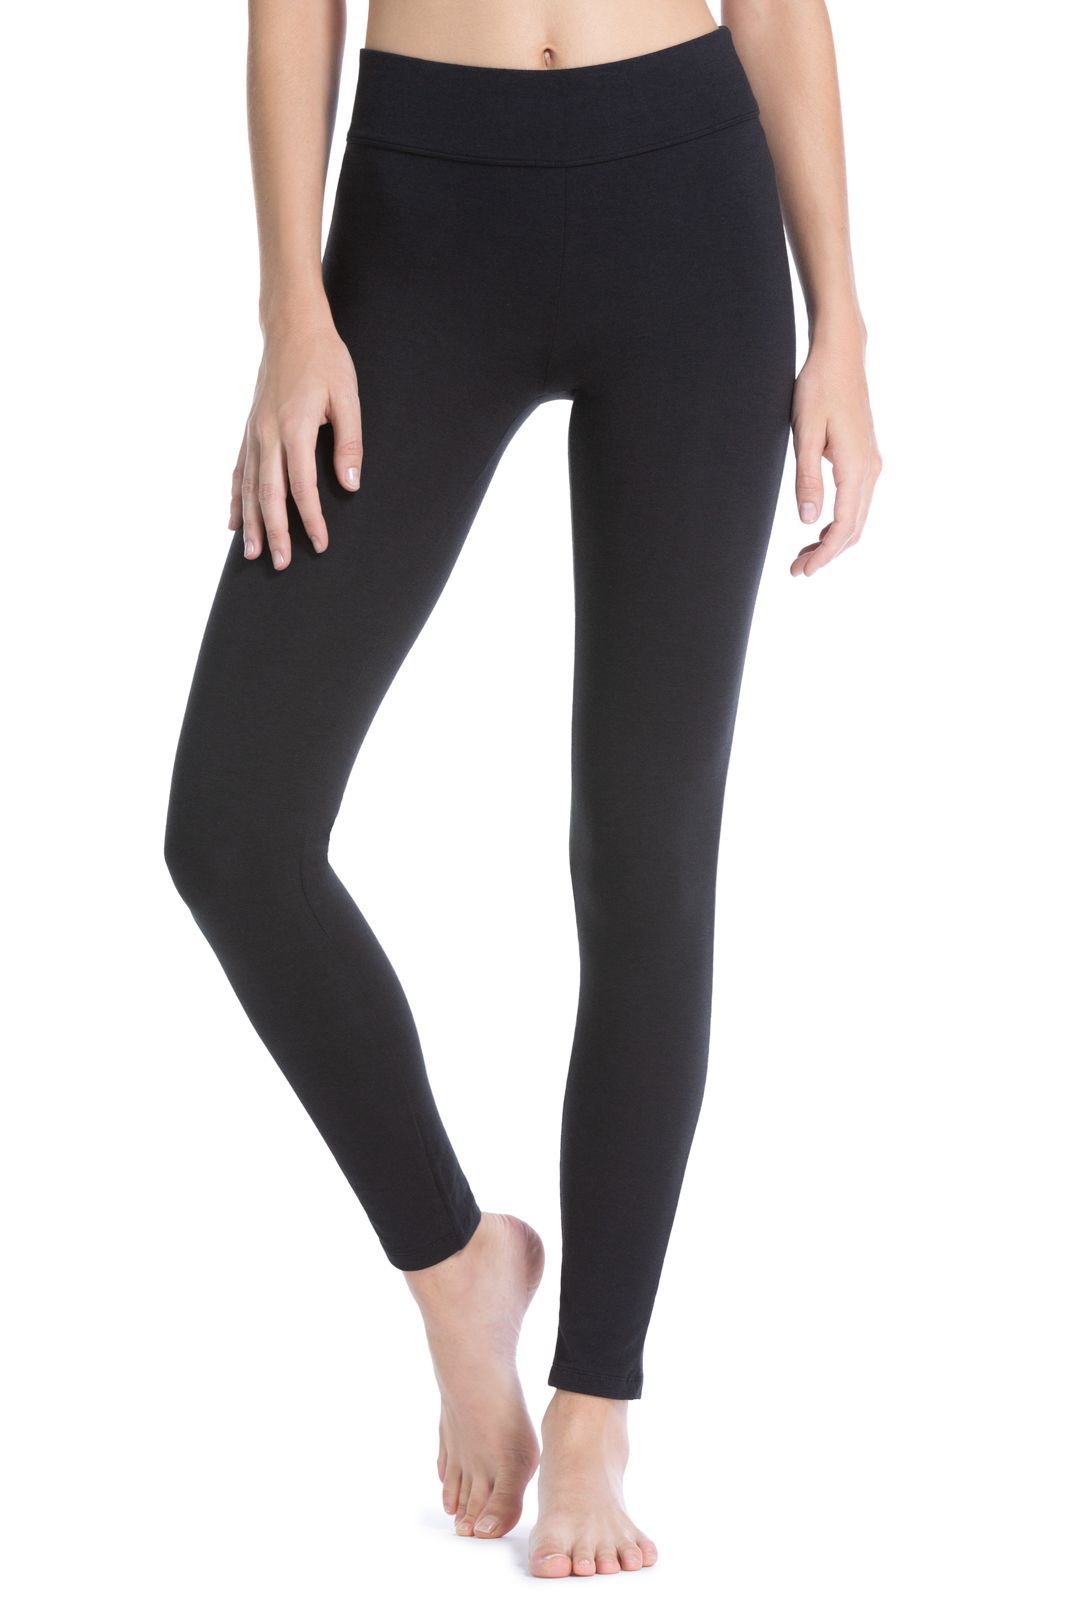 Black Yoga Leggings With Elastic Fit And Yarn Holes For Women Designer  Workout Gym Wear And Fitness Running Bare Tights With Transparent Design  From Psqc, $31.14